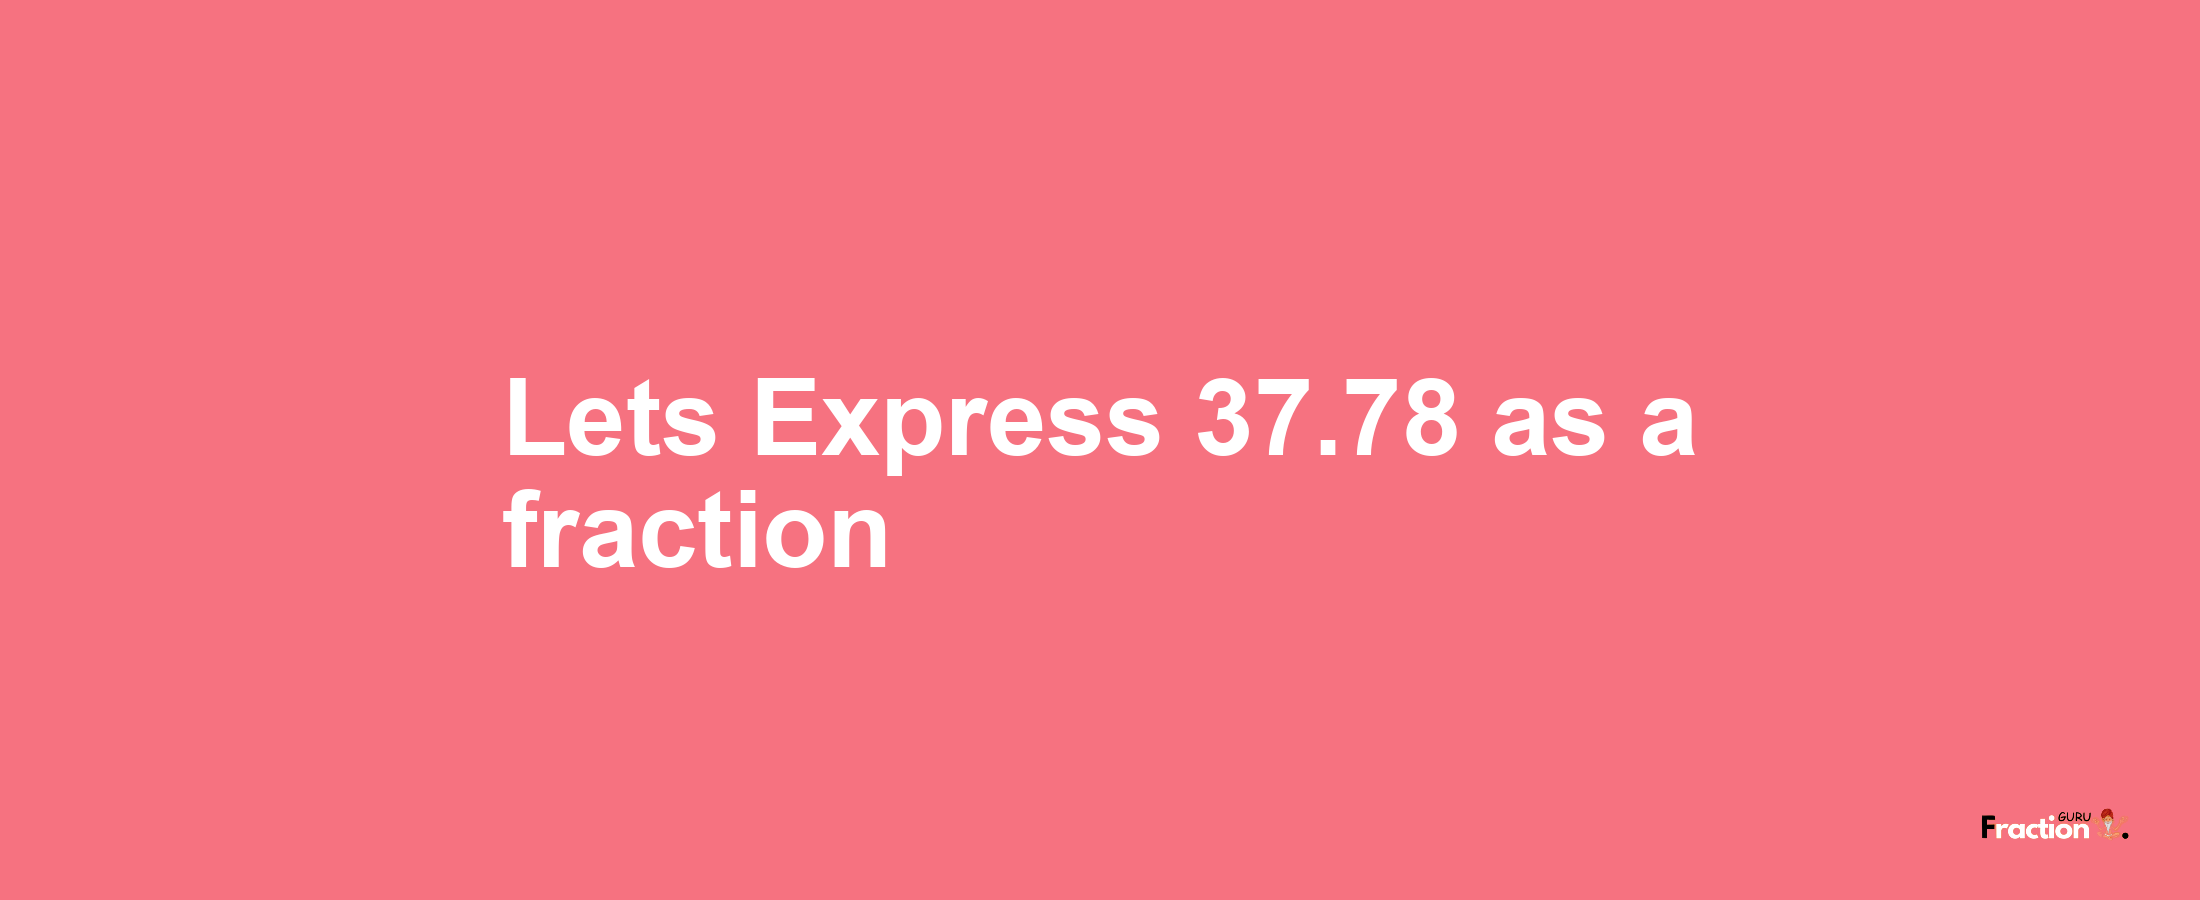 Lets Express 37.78 as afraction